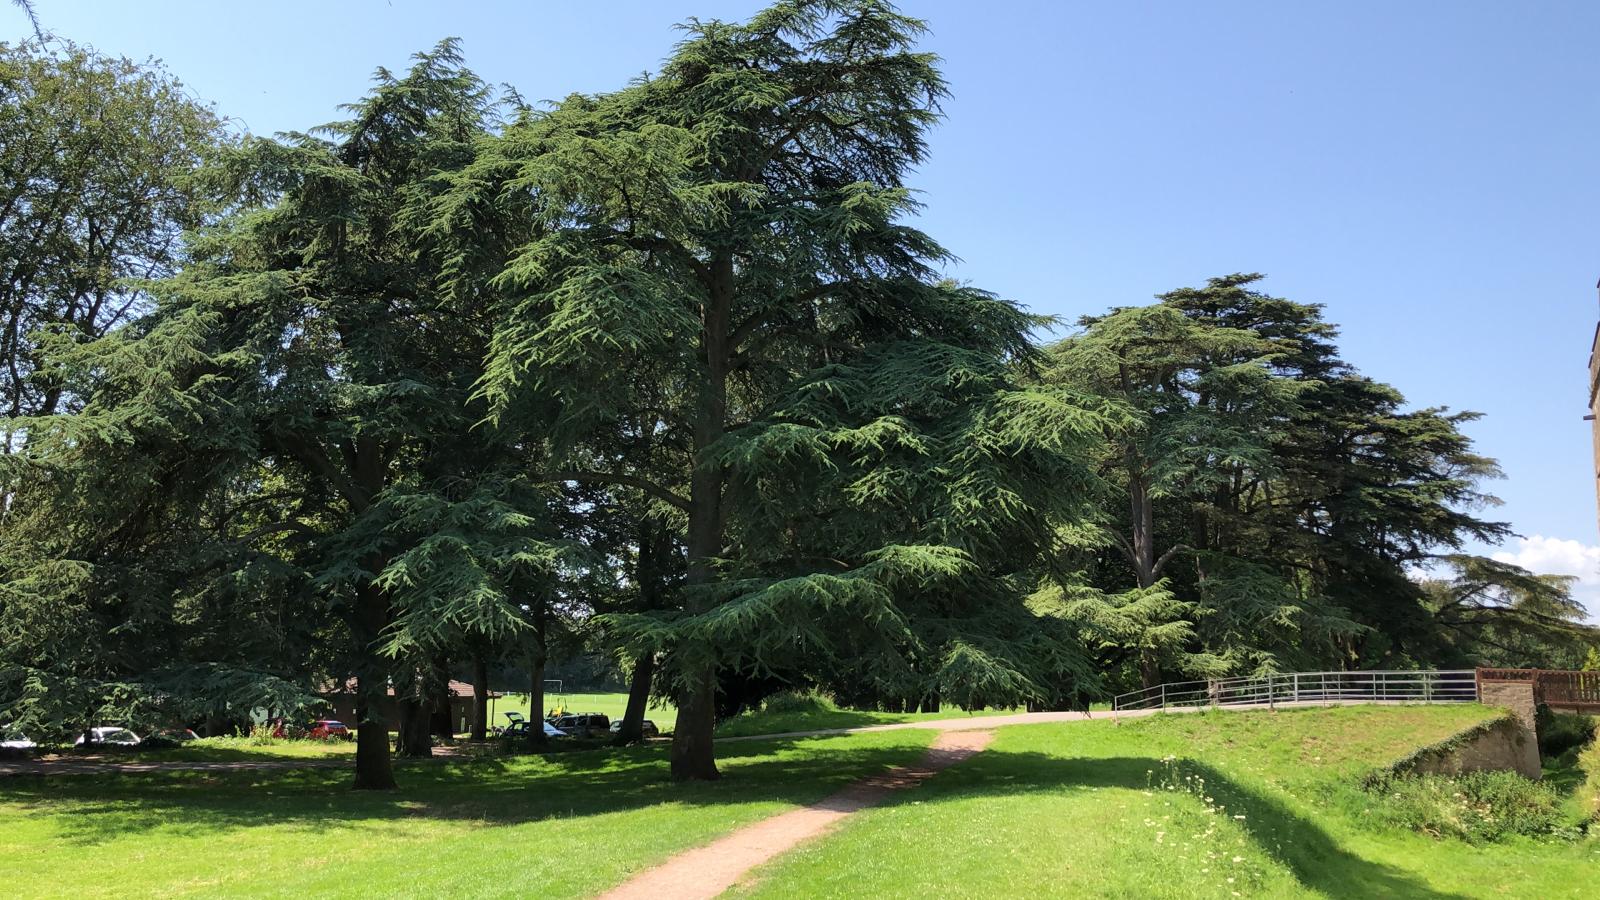 Photograph of large cedar trees on sunny day